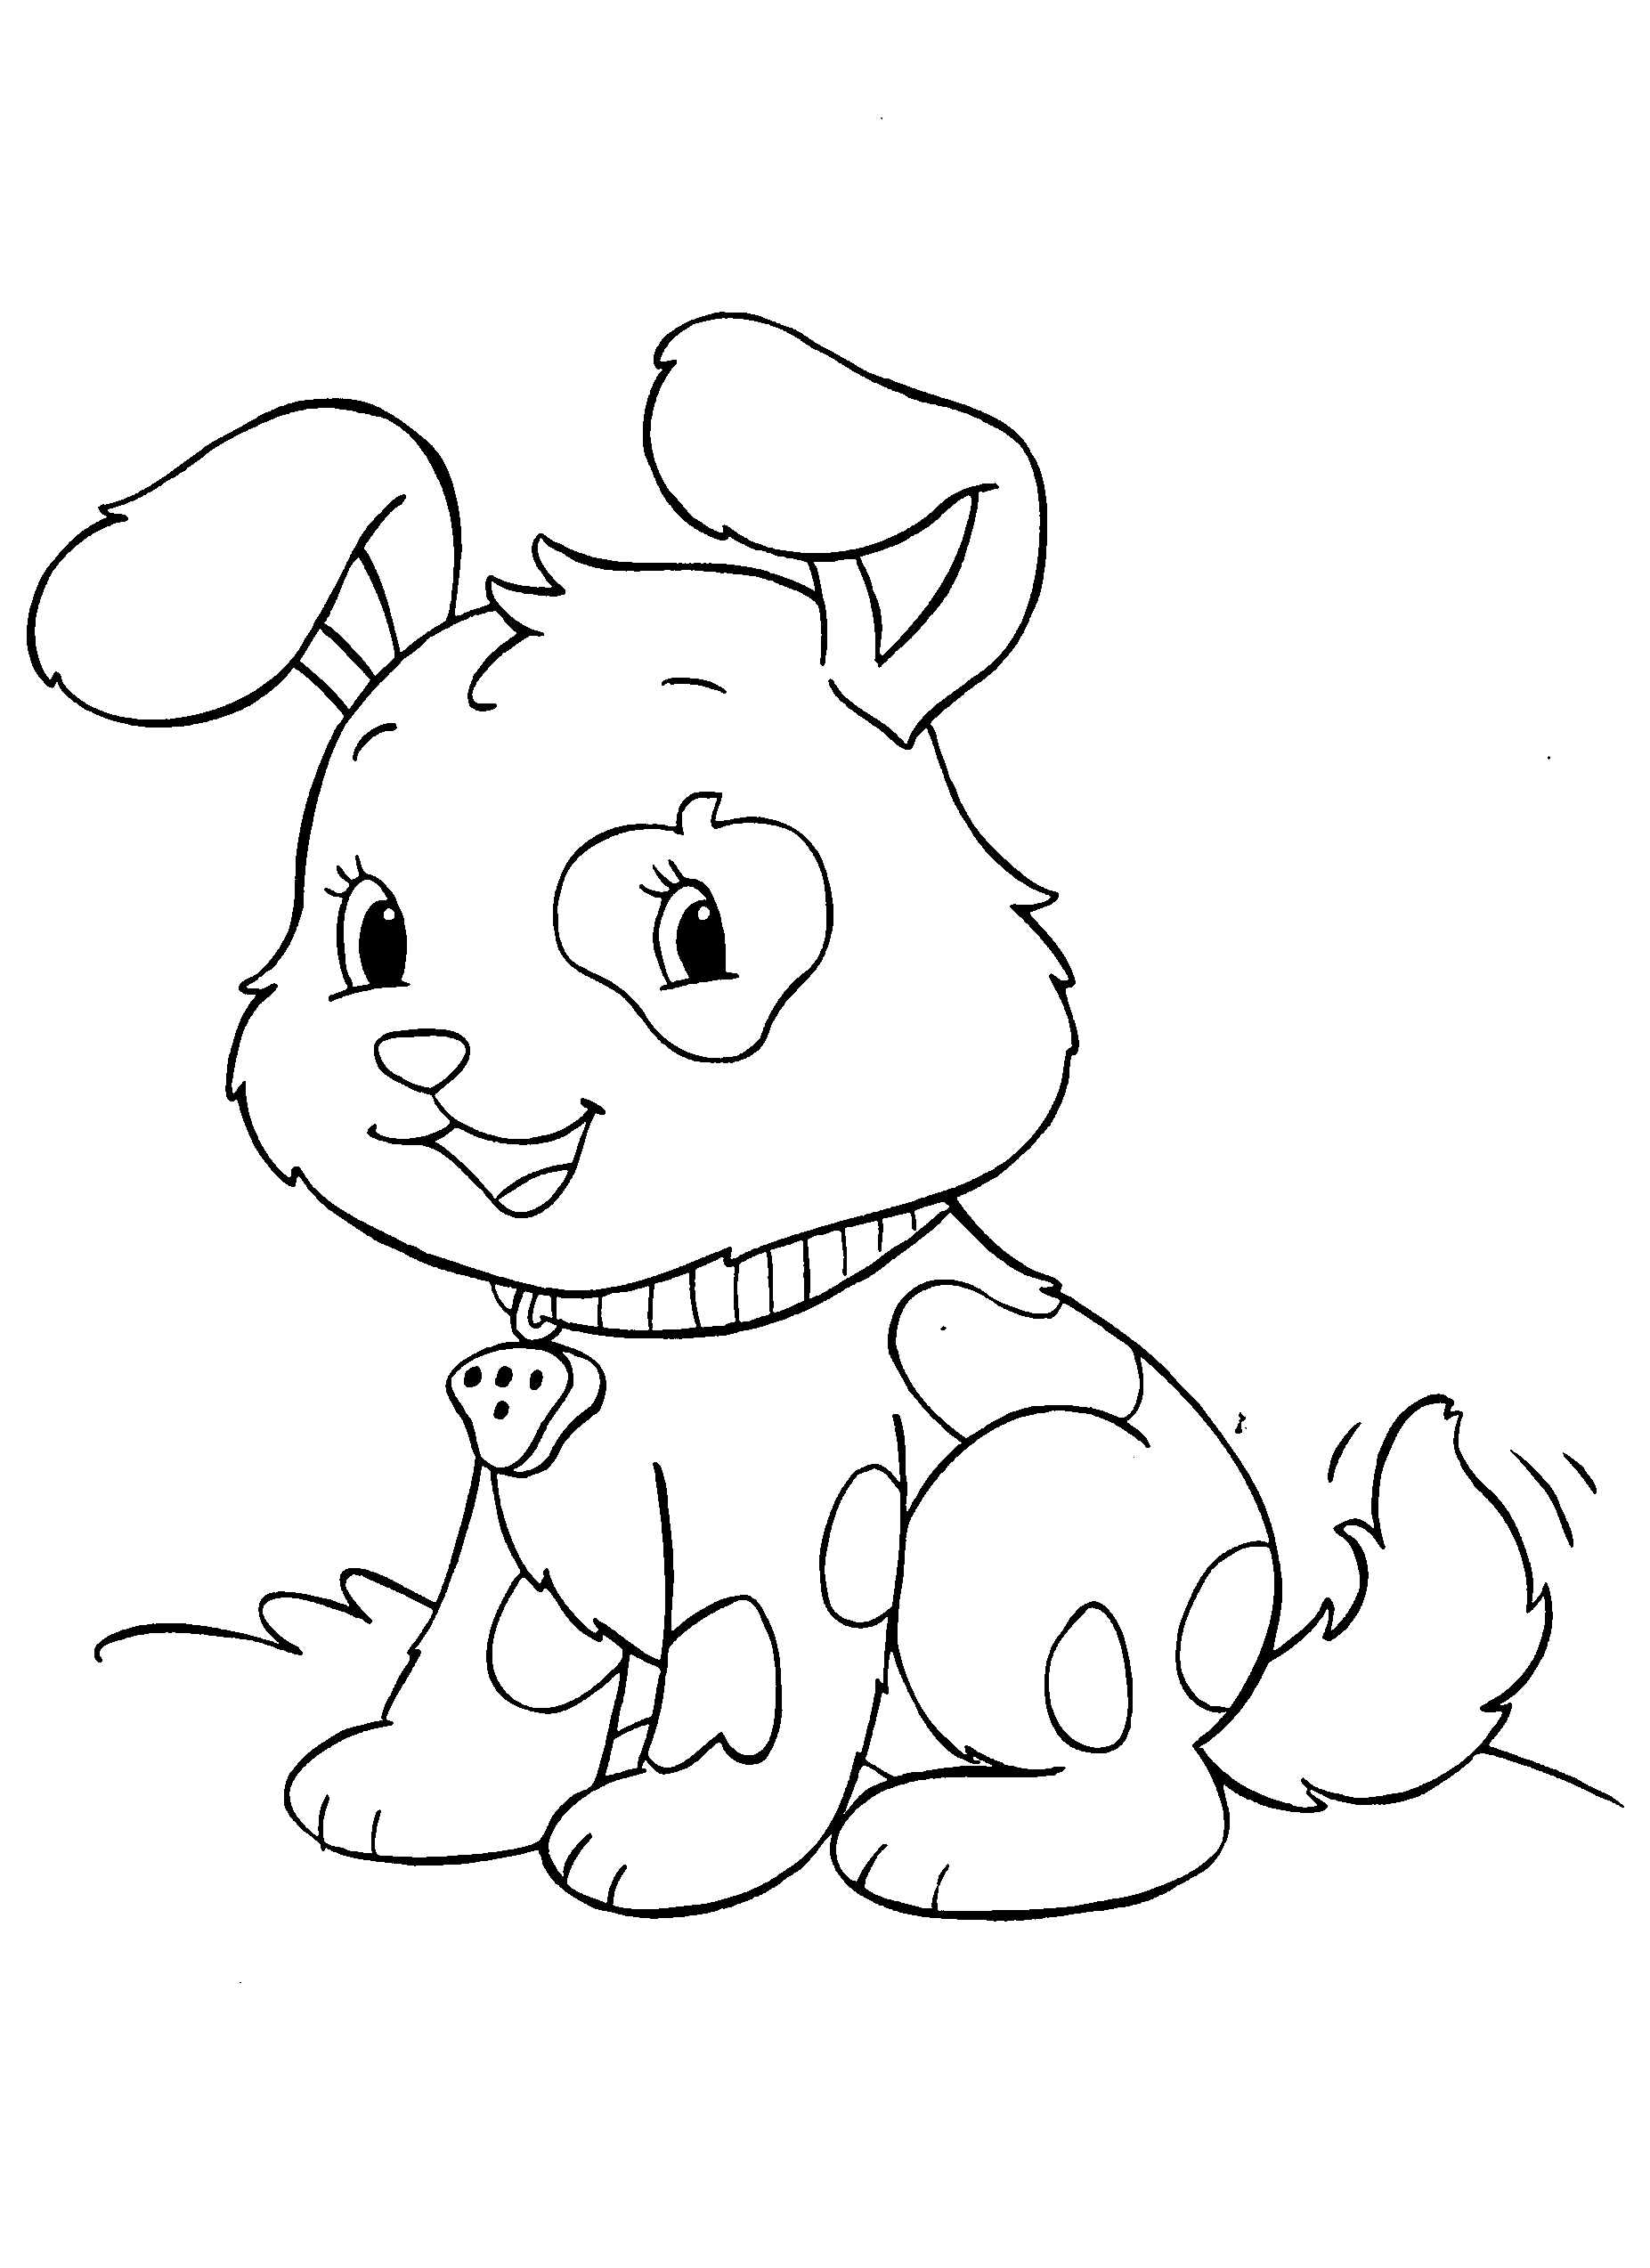 Shih Tzu Puppies Coloring Pages Collection Shih Tzu Coloring Pages Pictures Sabadaphnecottage